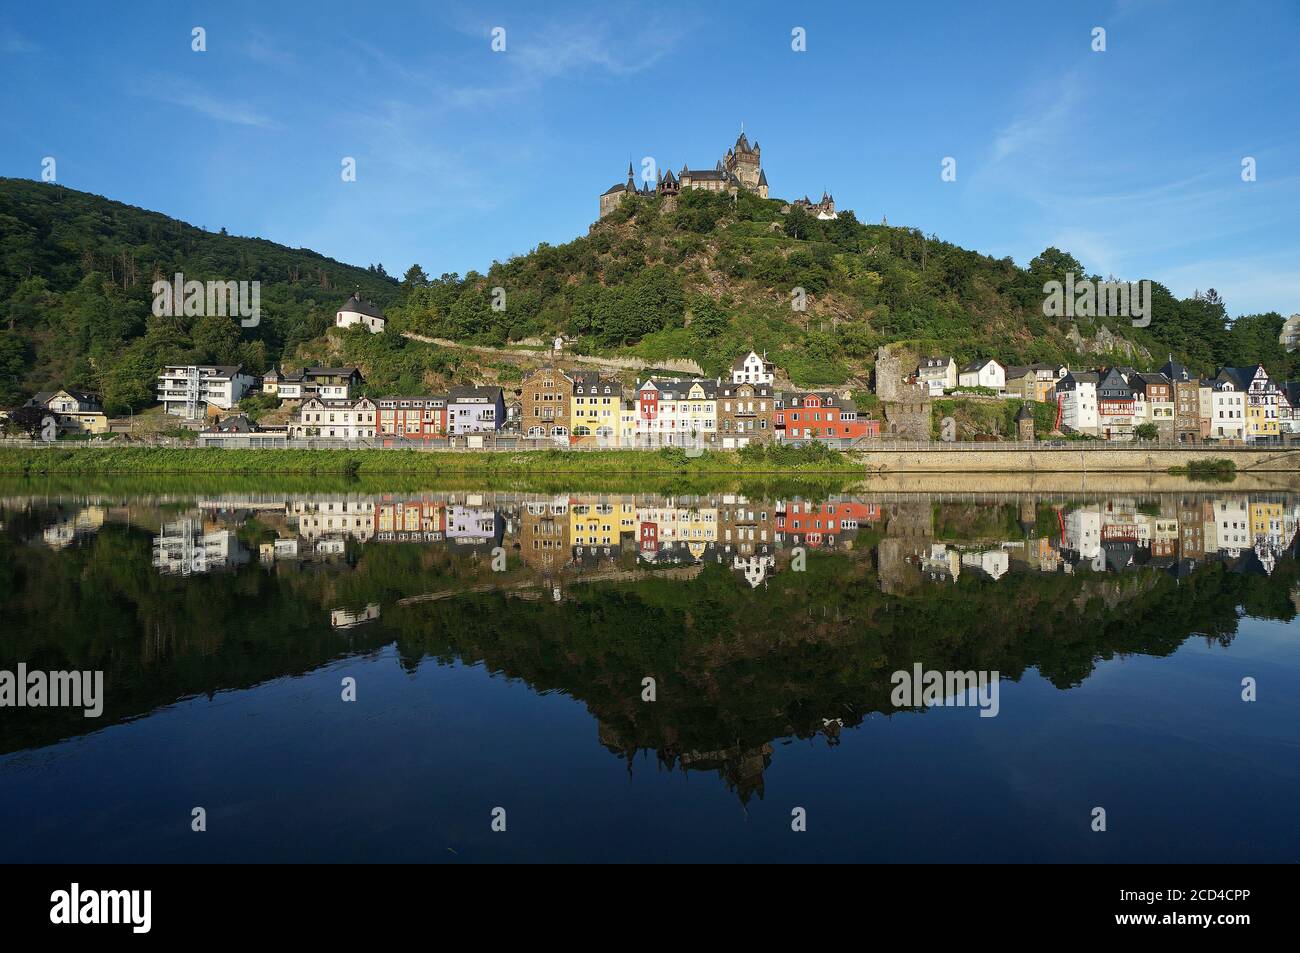 Cochem seen from the opposite side of river Moselle, Germany Stock Photo